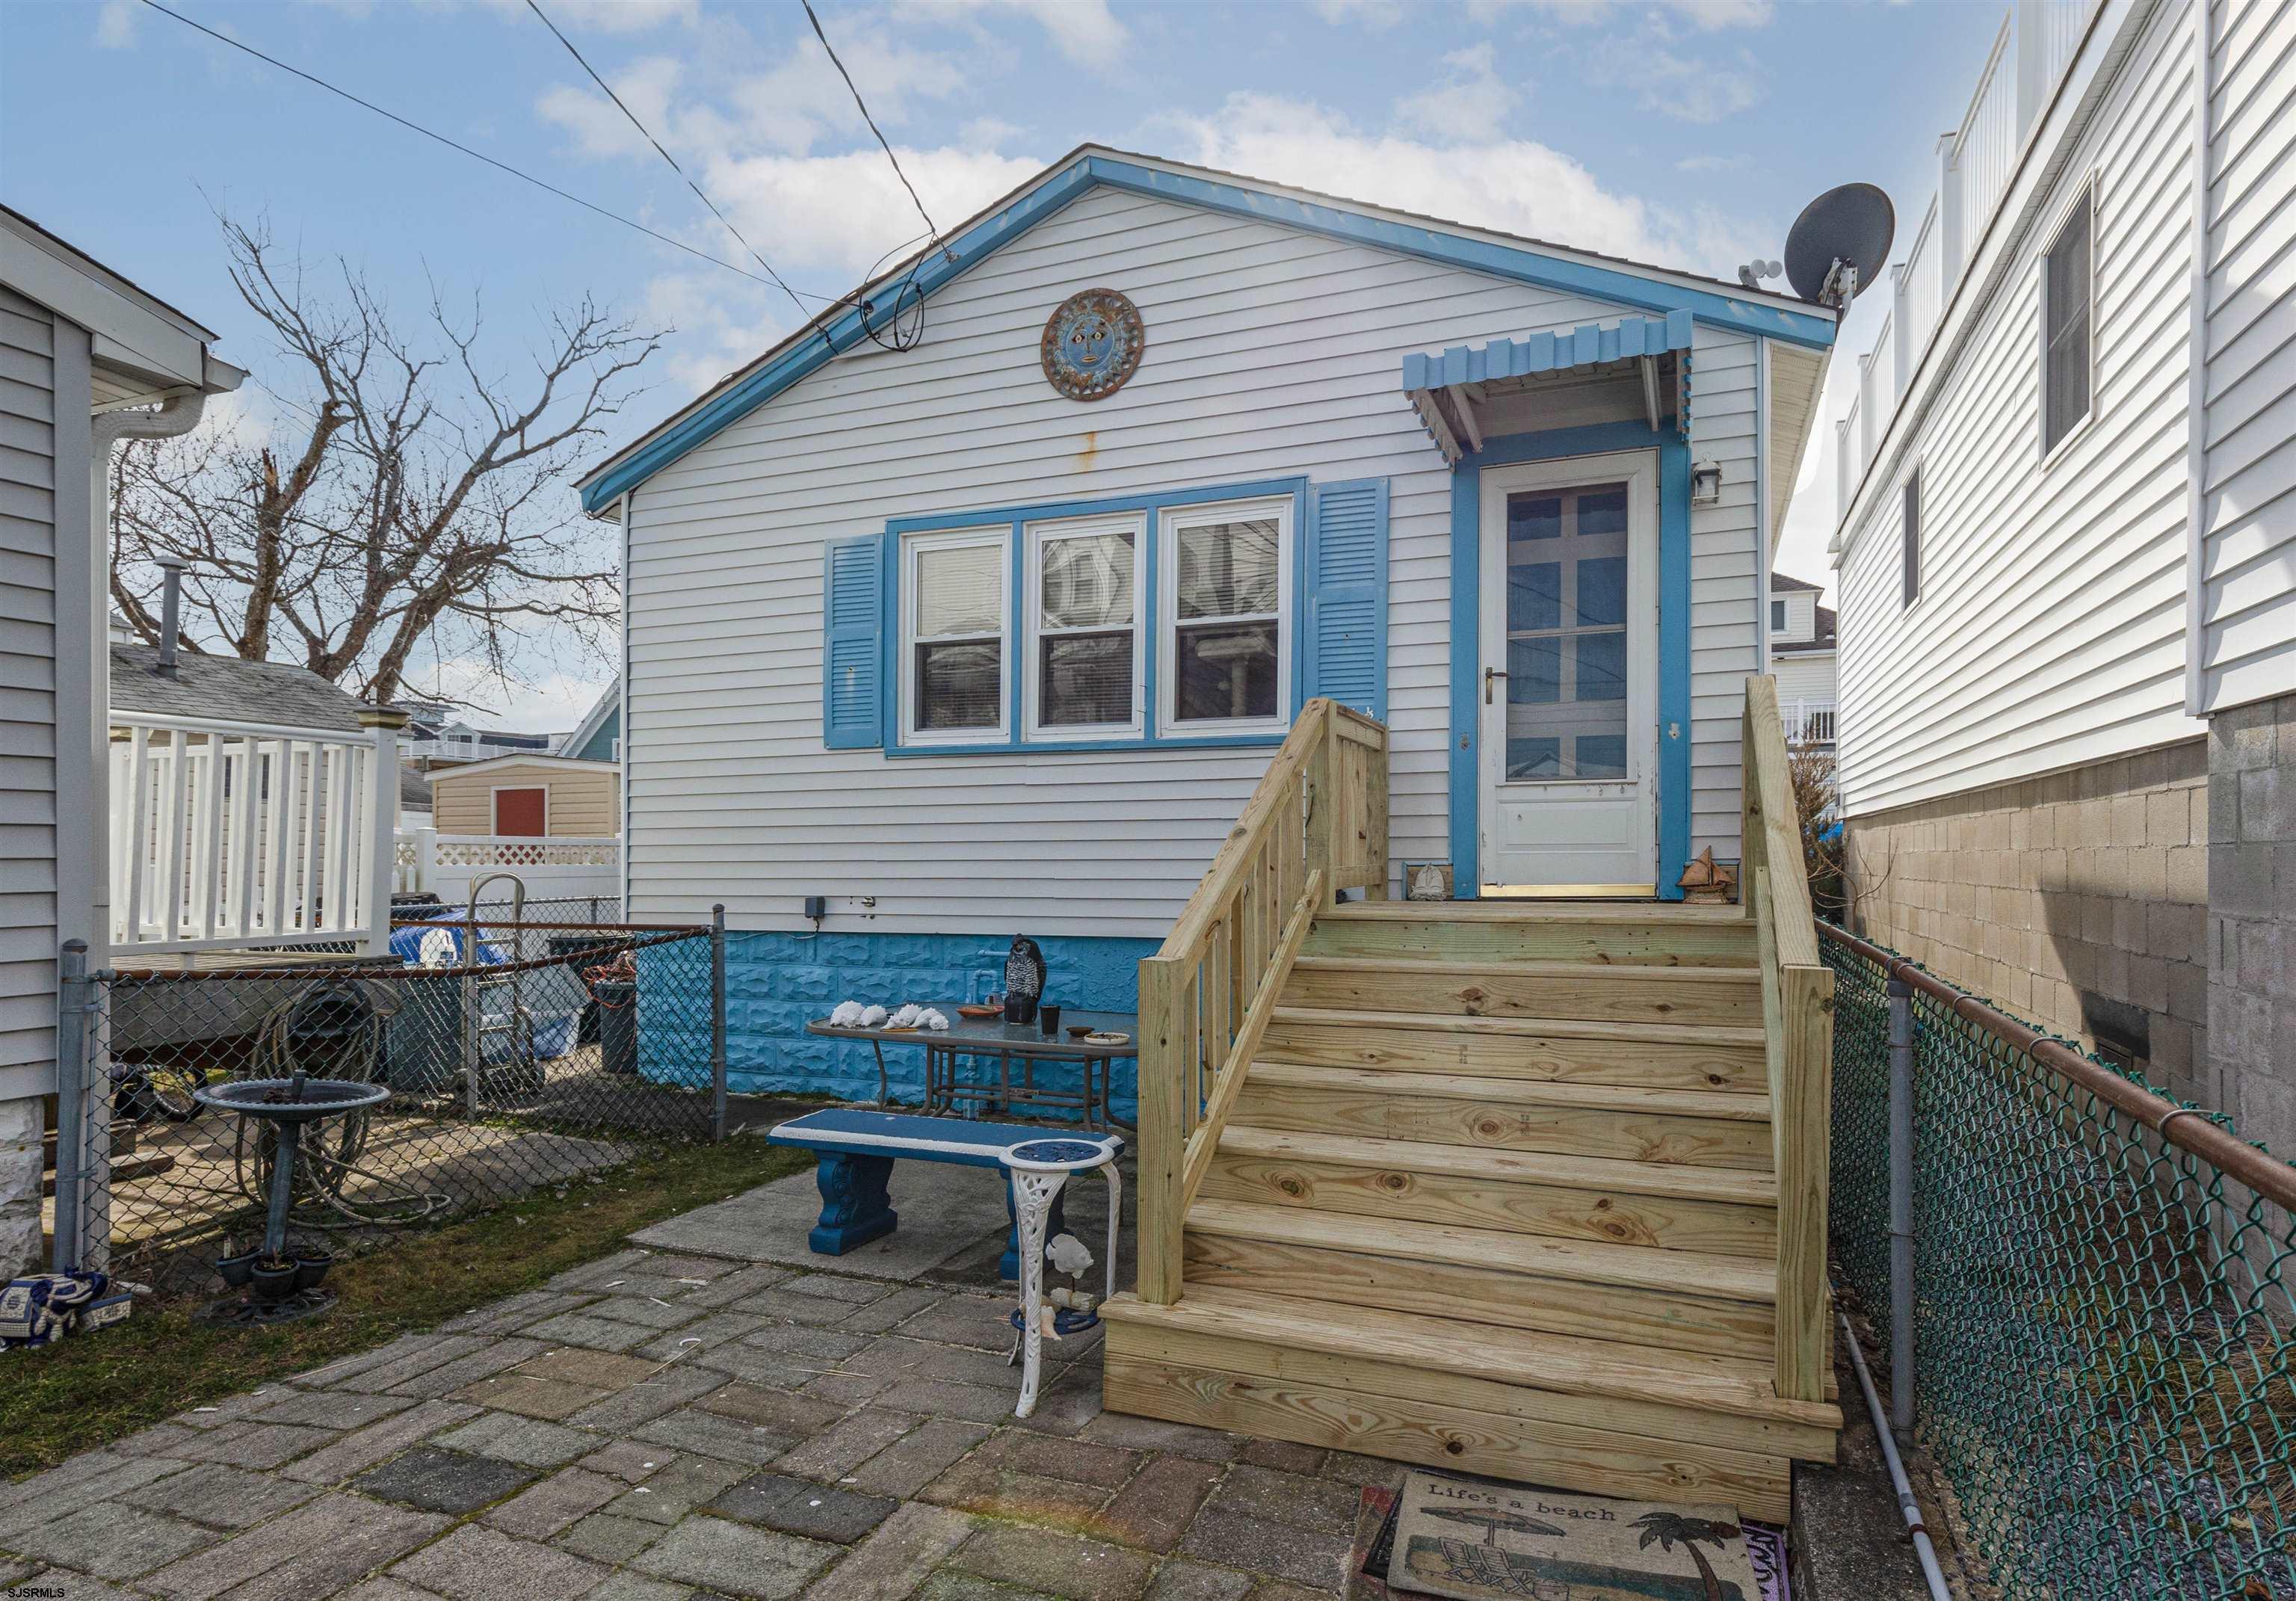 106 1/2 W 16th Ave Ave, North Wildwood, NJ 08260